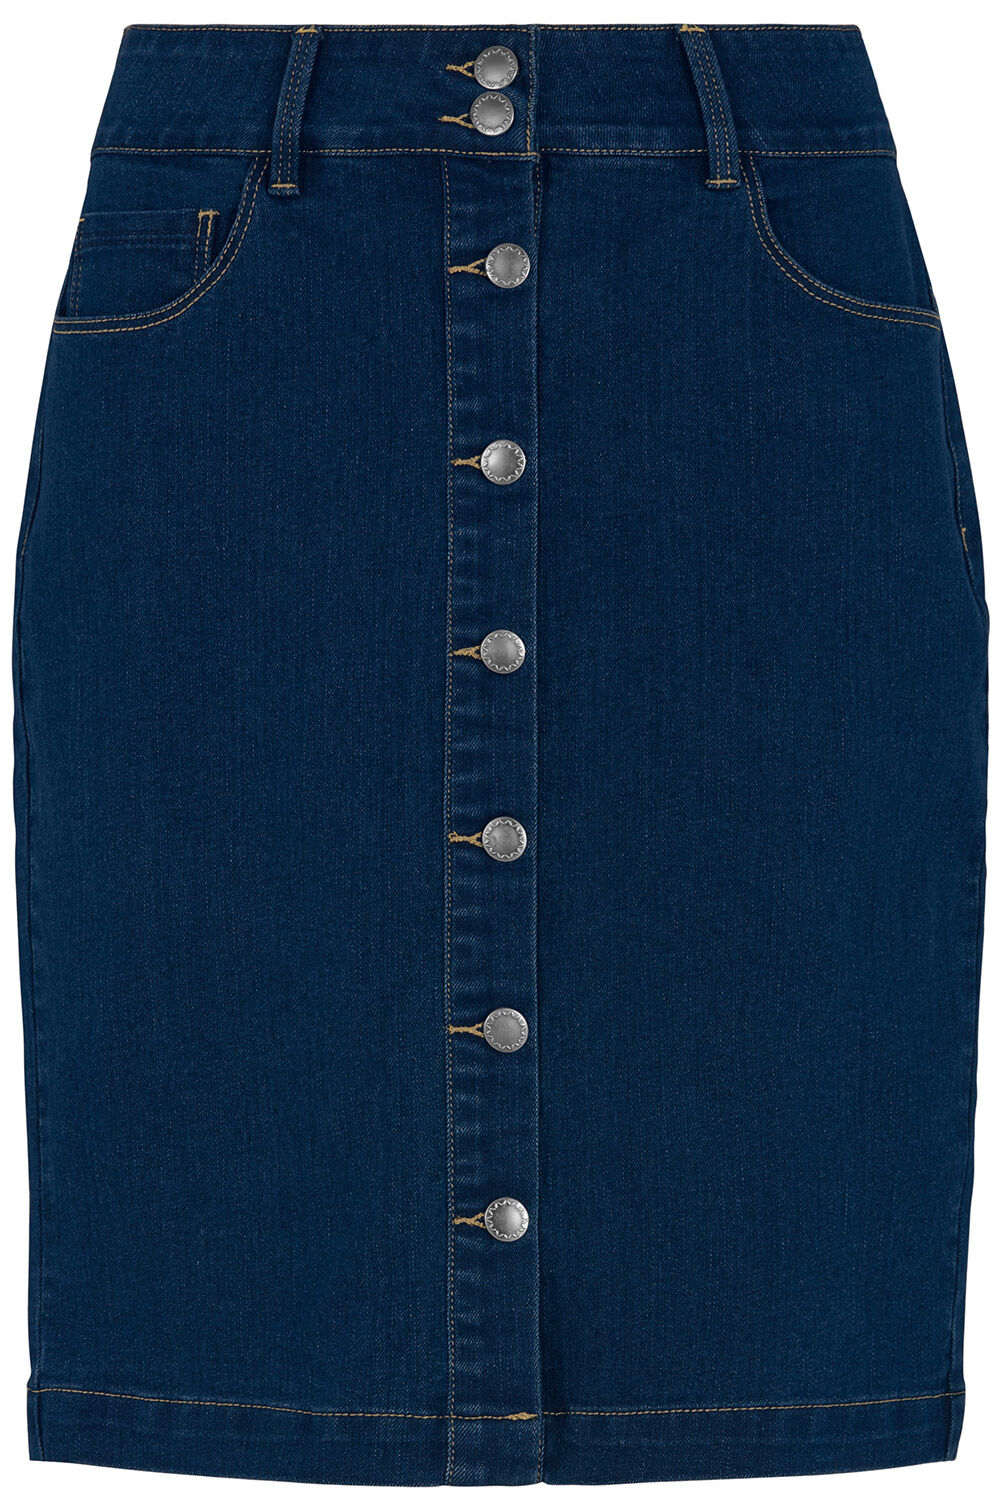 denim midi skirt with buttons